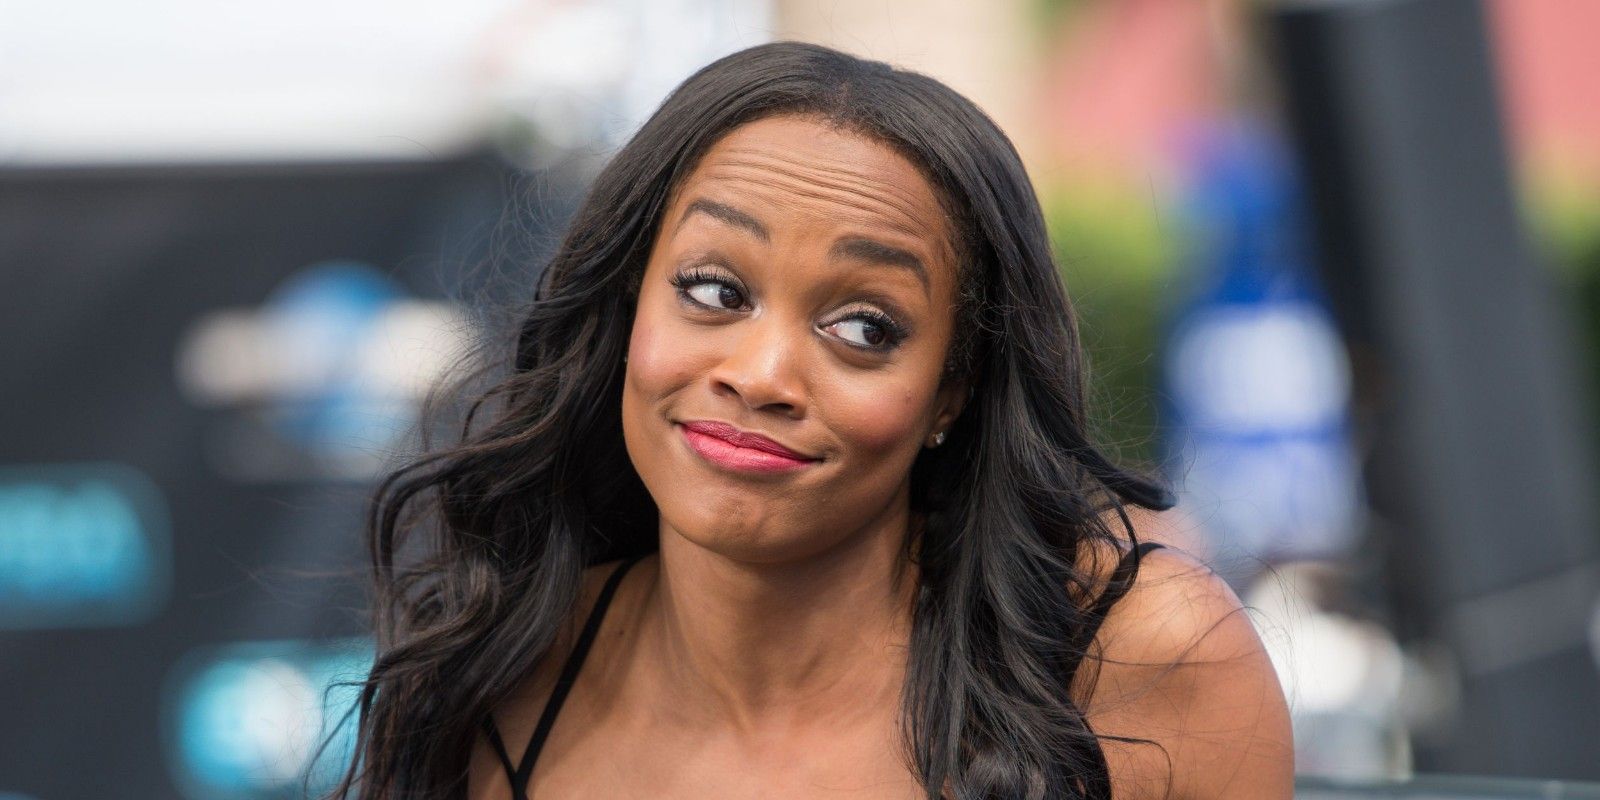 The Bachelorette's Rachel Lindsay slept with two of three men during fantasy suites